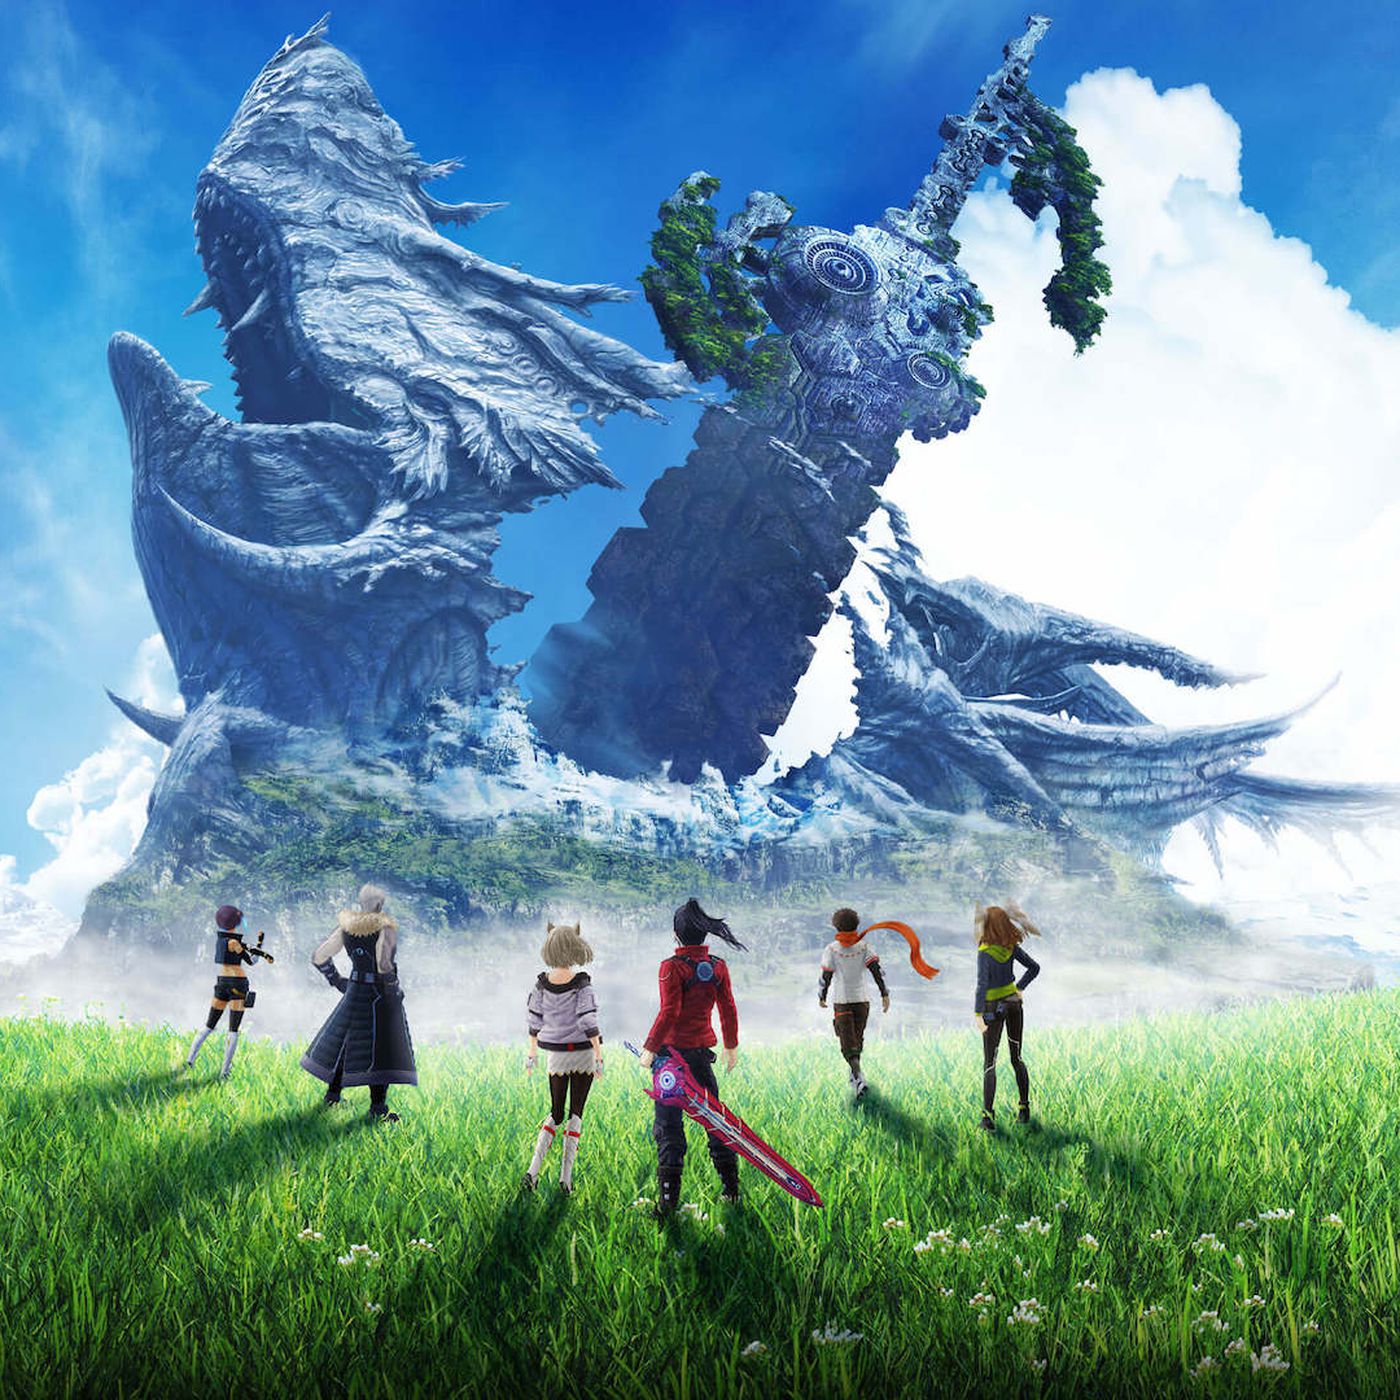 Xenoblade Chronicles 3 gets a new trailer